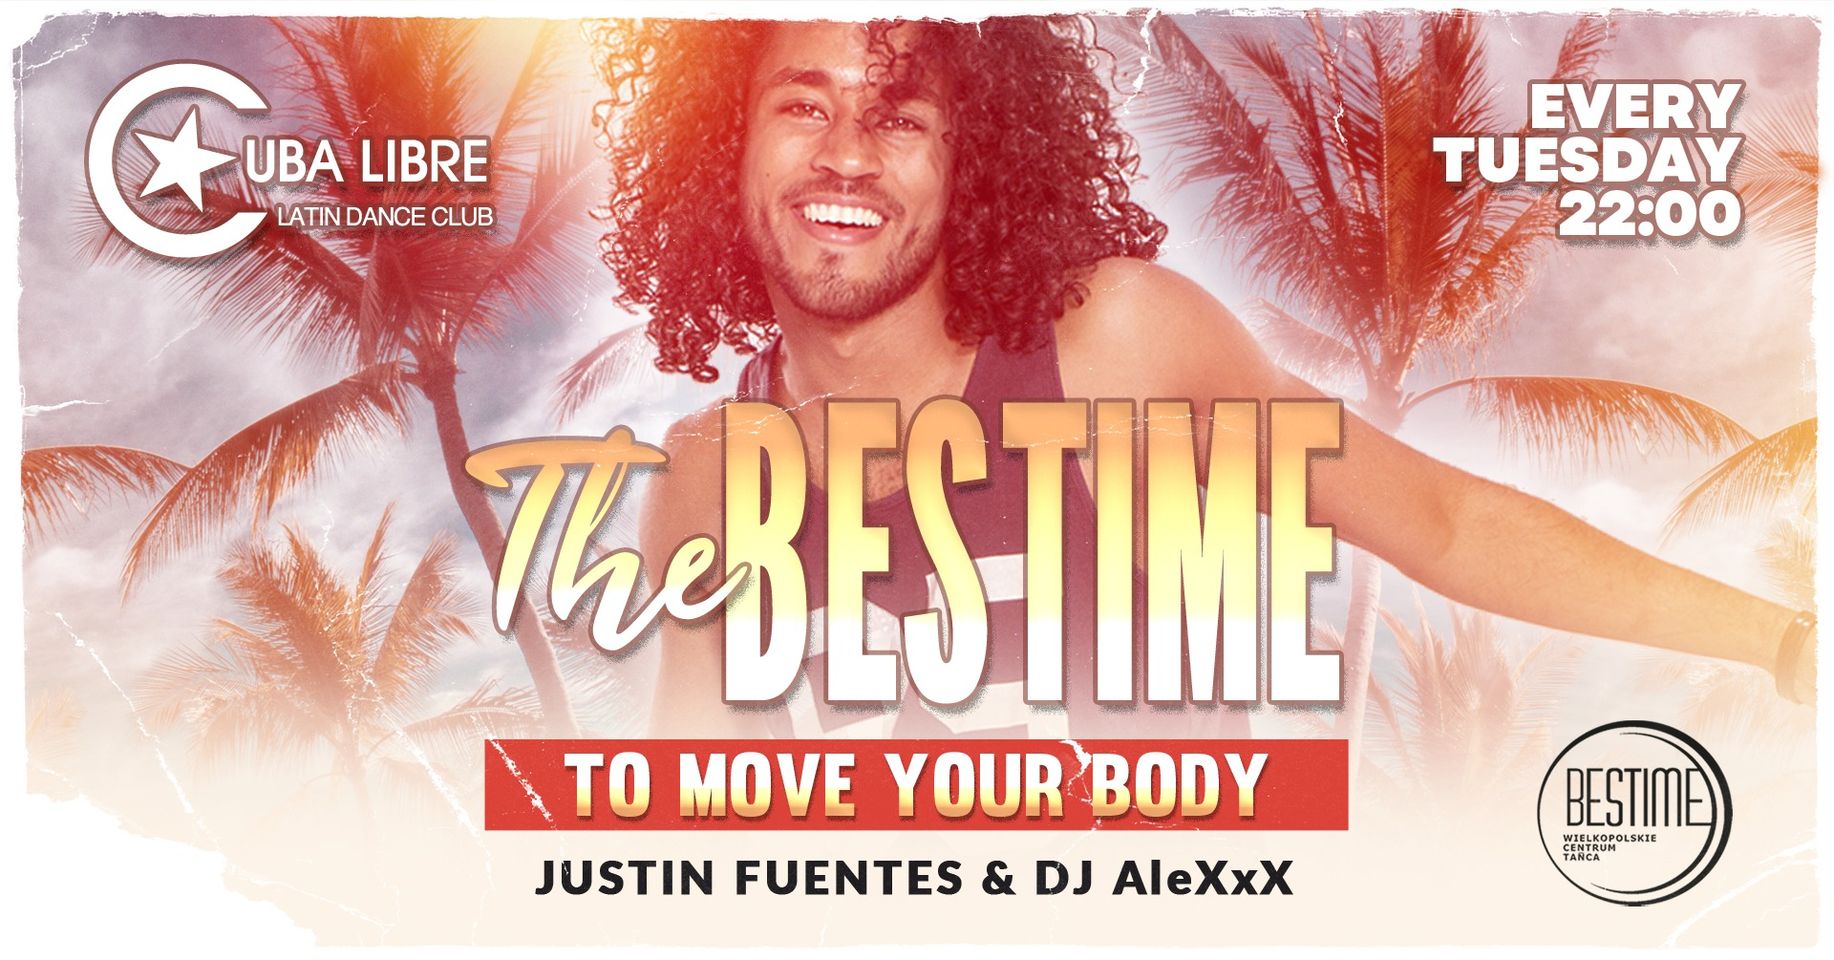 The „BESTIME” to move your body!